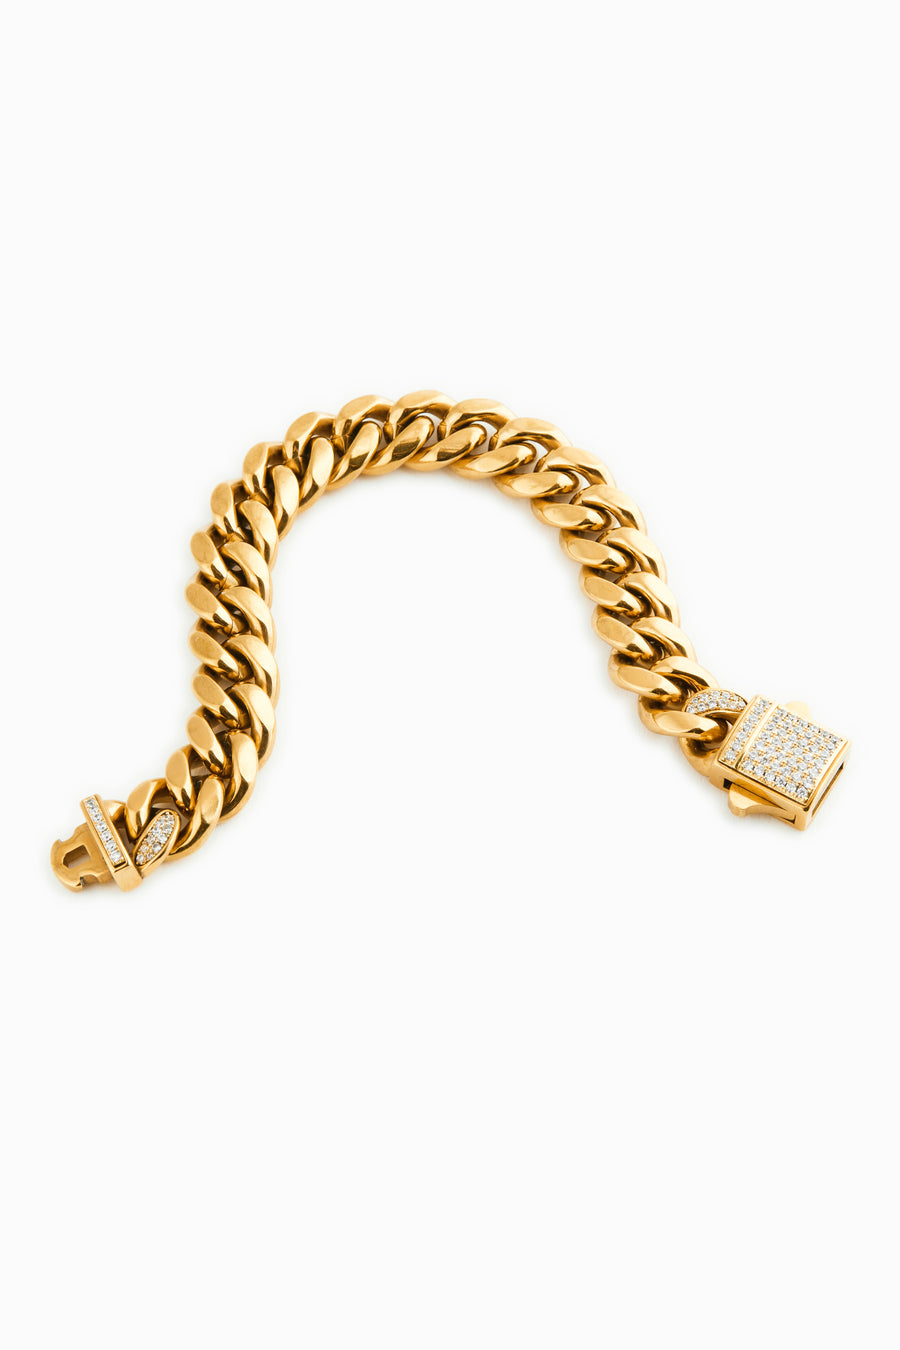 Cuban Bracelet With Iced Clasp 12mm - 18K Gold